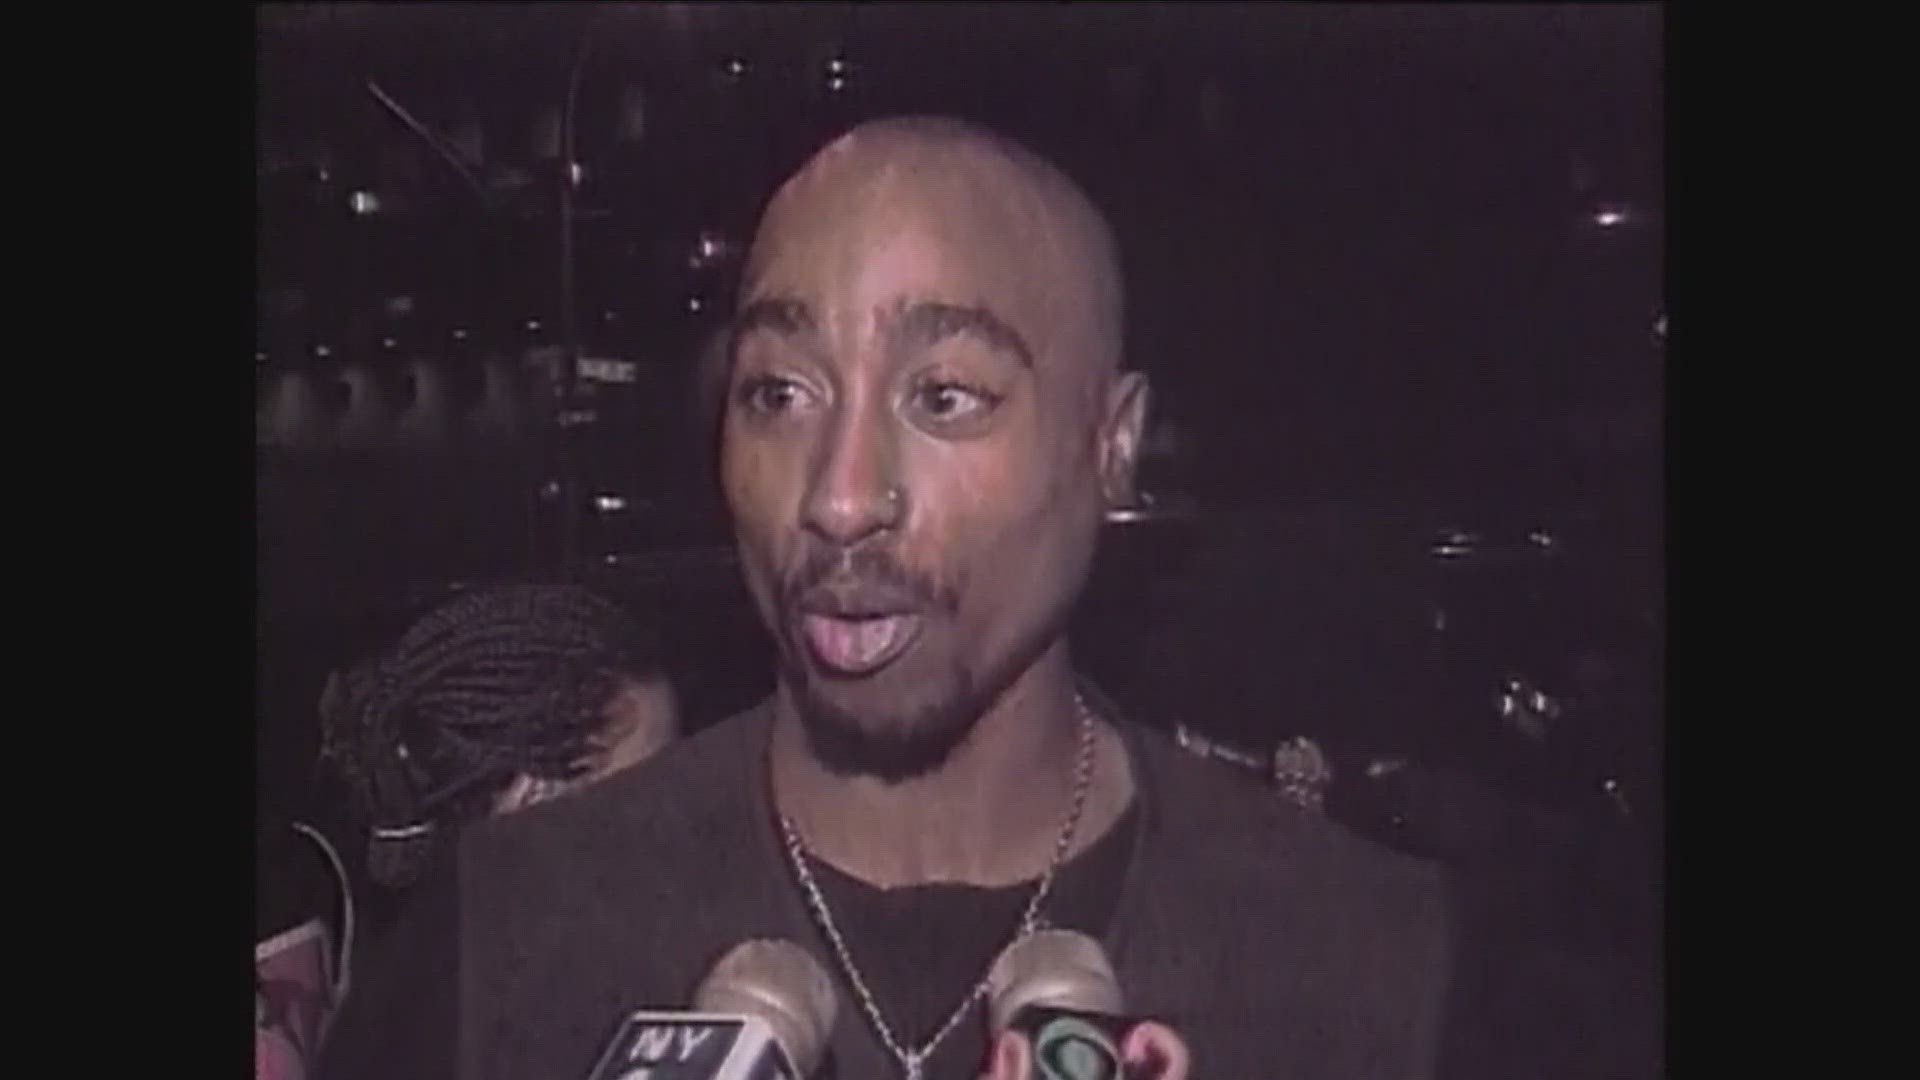 Search Warrant Served In 1996 Fatal Drive By Shooting Of Rapper Tupac Shakur